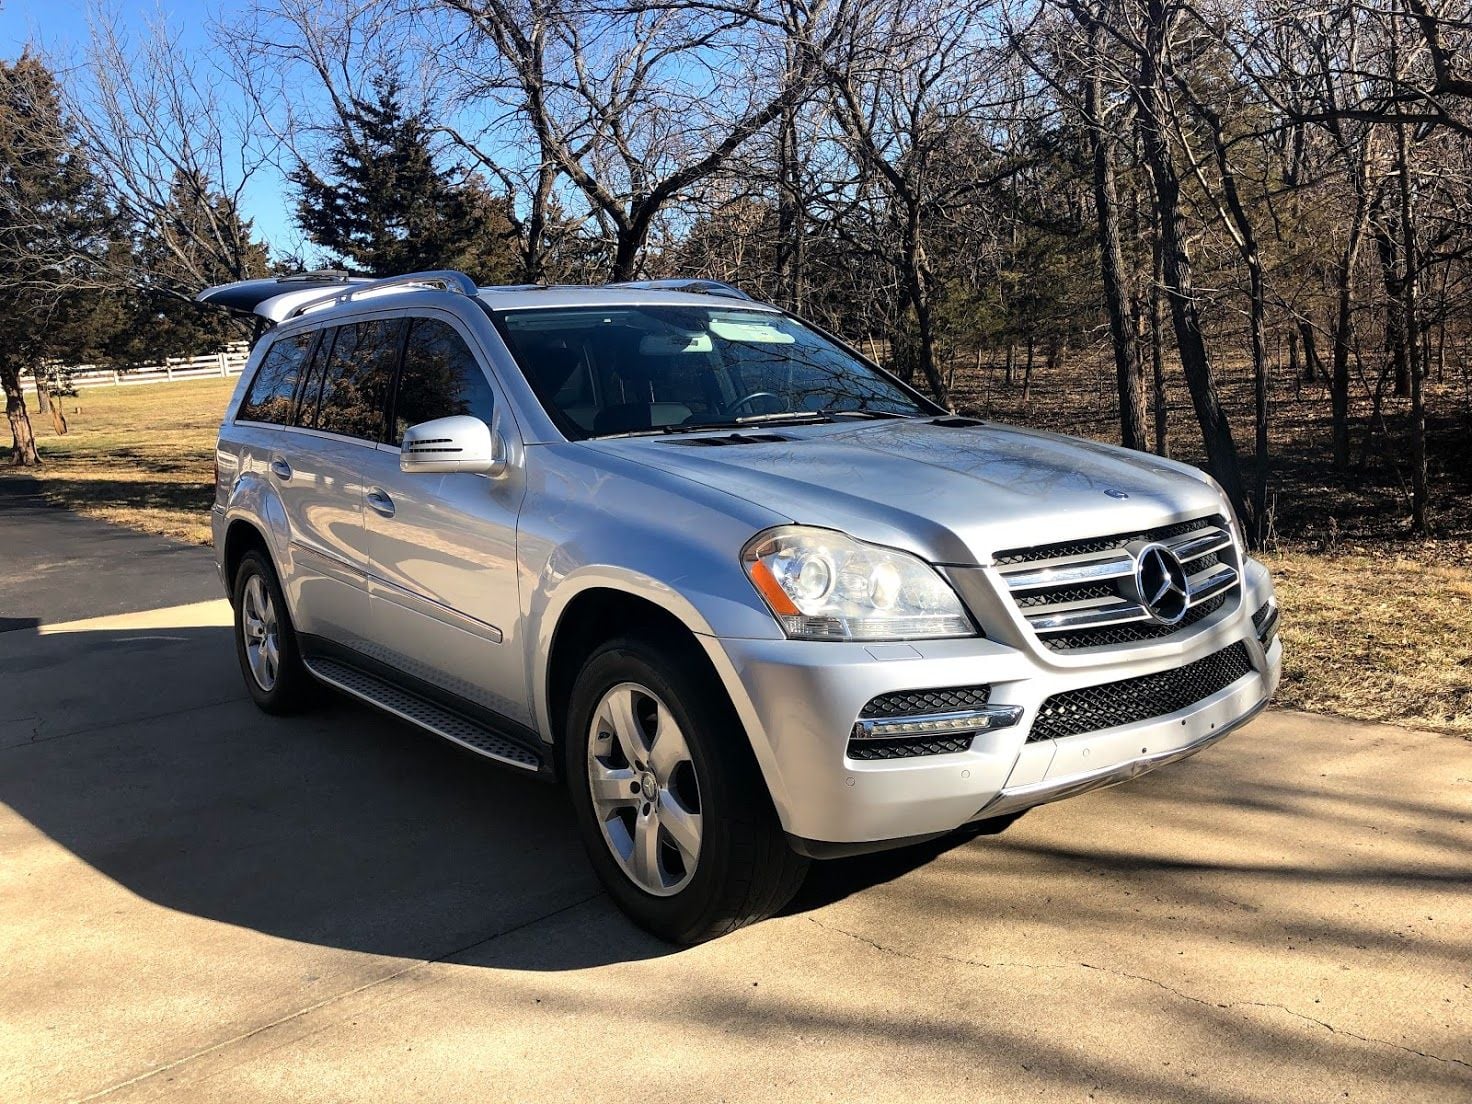 2012 Mercedes-Benz GL450 - 2012 GL 450 for sale - Used - VIN 4JGBF7BE4CA765280 - 90,237 Miles - 8 cyl - AWD - Automatic - SUV - Silver - Lenexa, KS 66220, United States